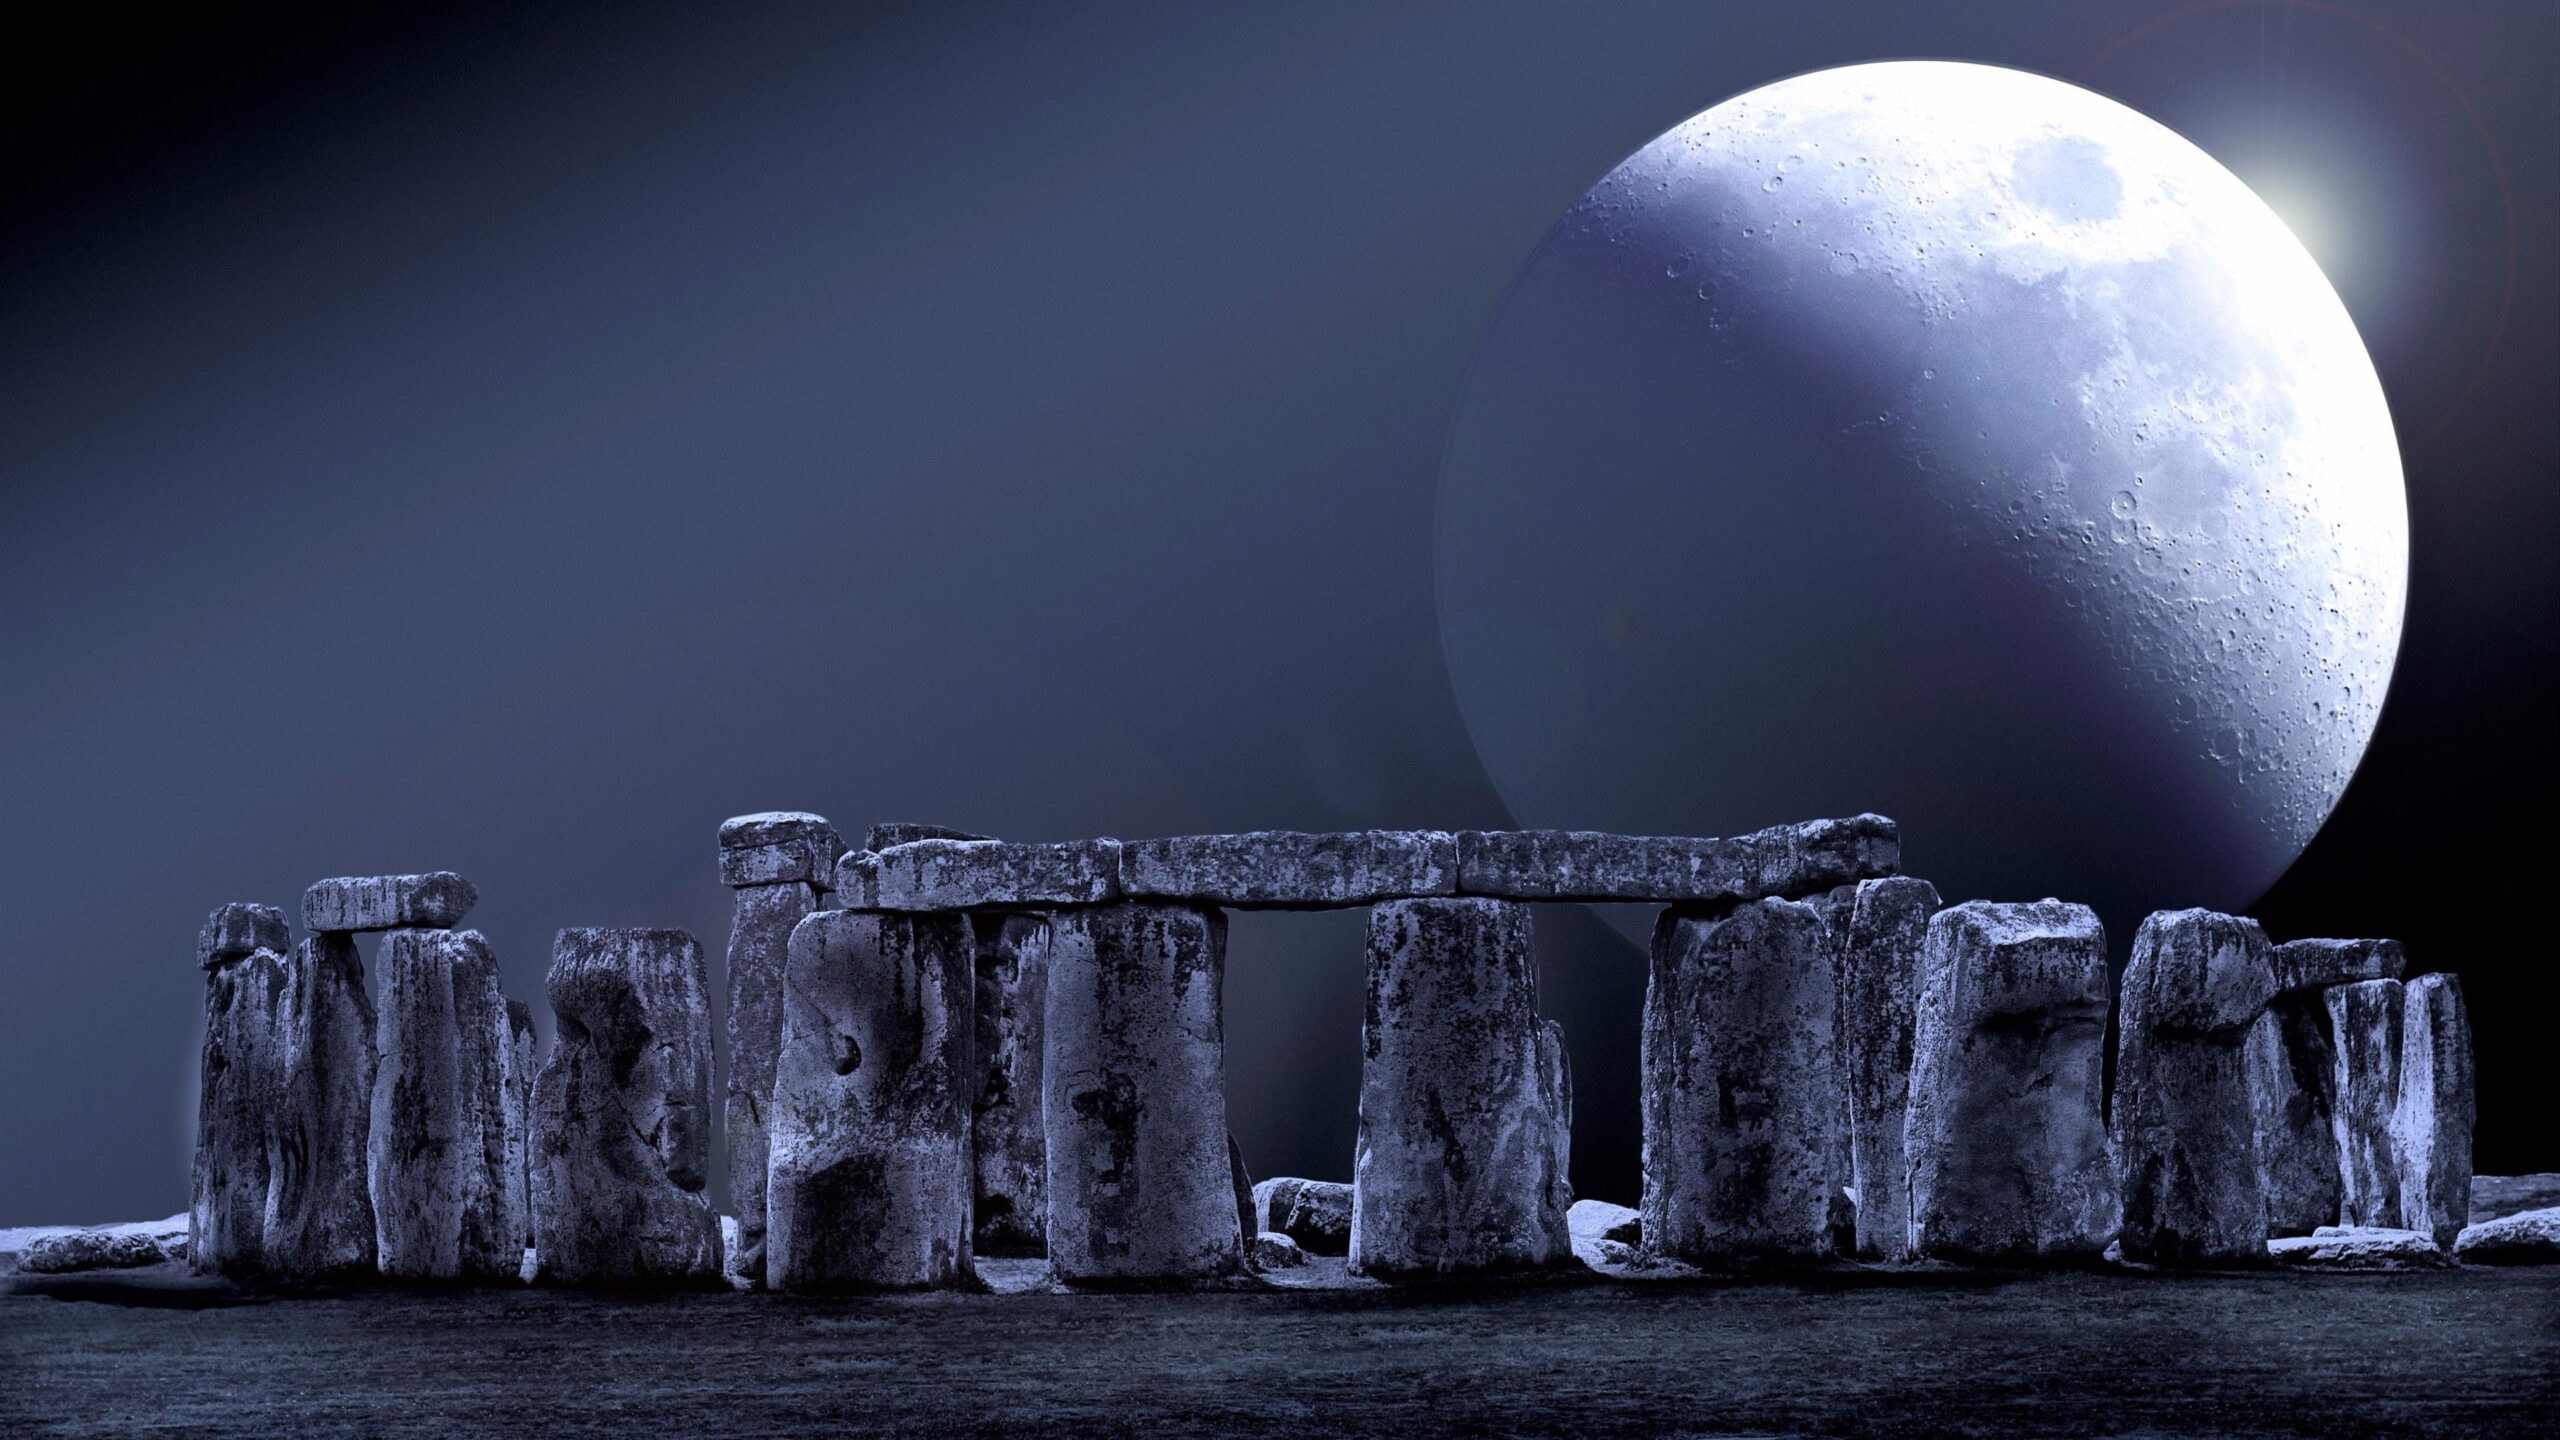 Stonehenge With An Enormous Full Moon 4K UltraHD Wallpapers